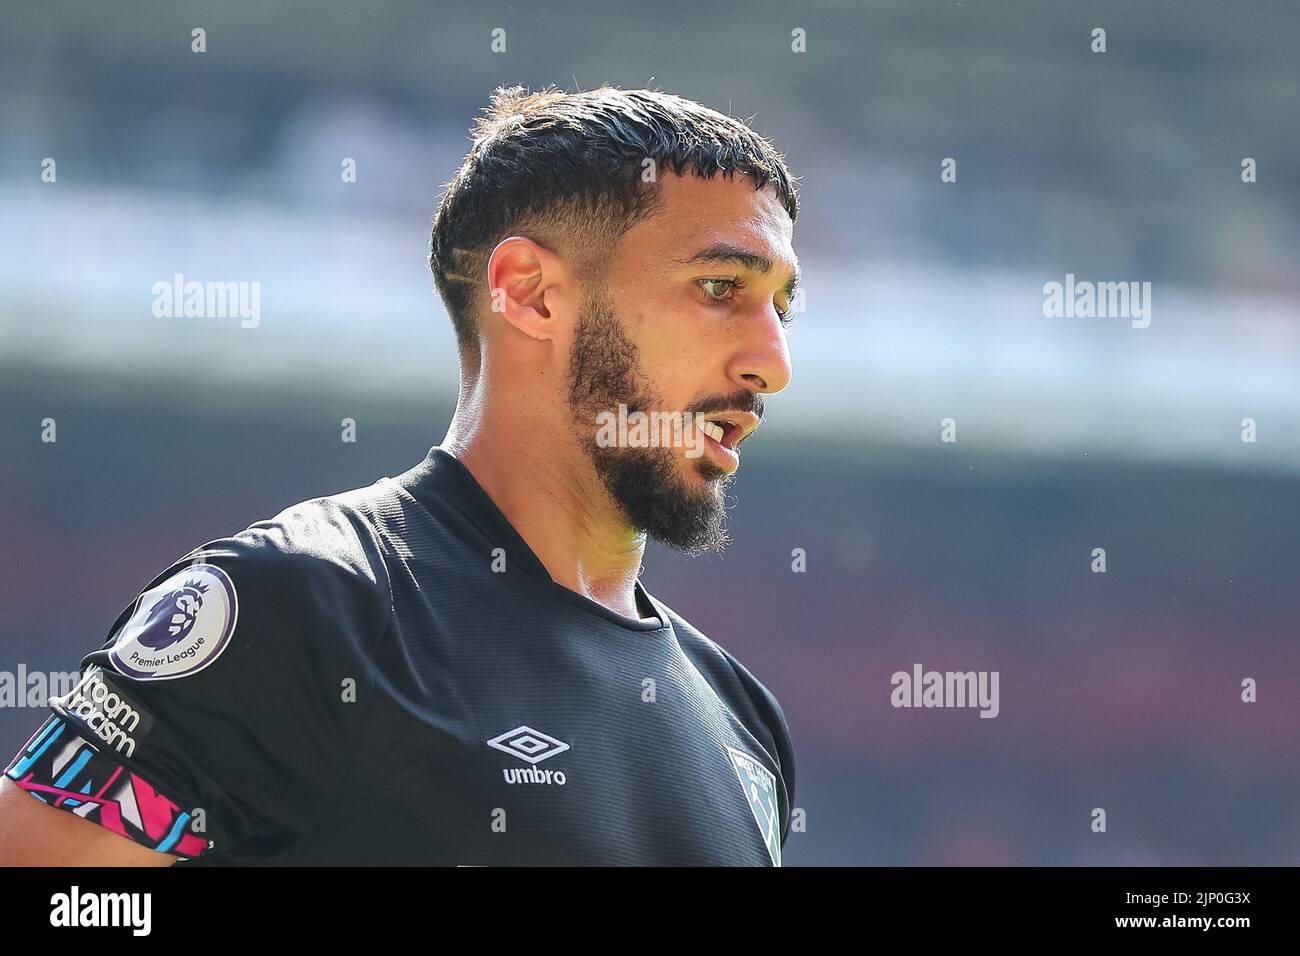 Saïd Benrahma #22 of West Ham United during the game Stock Photo